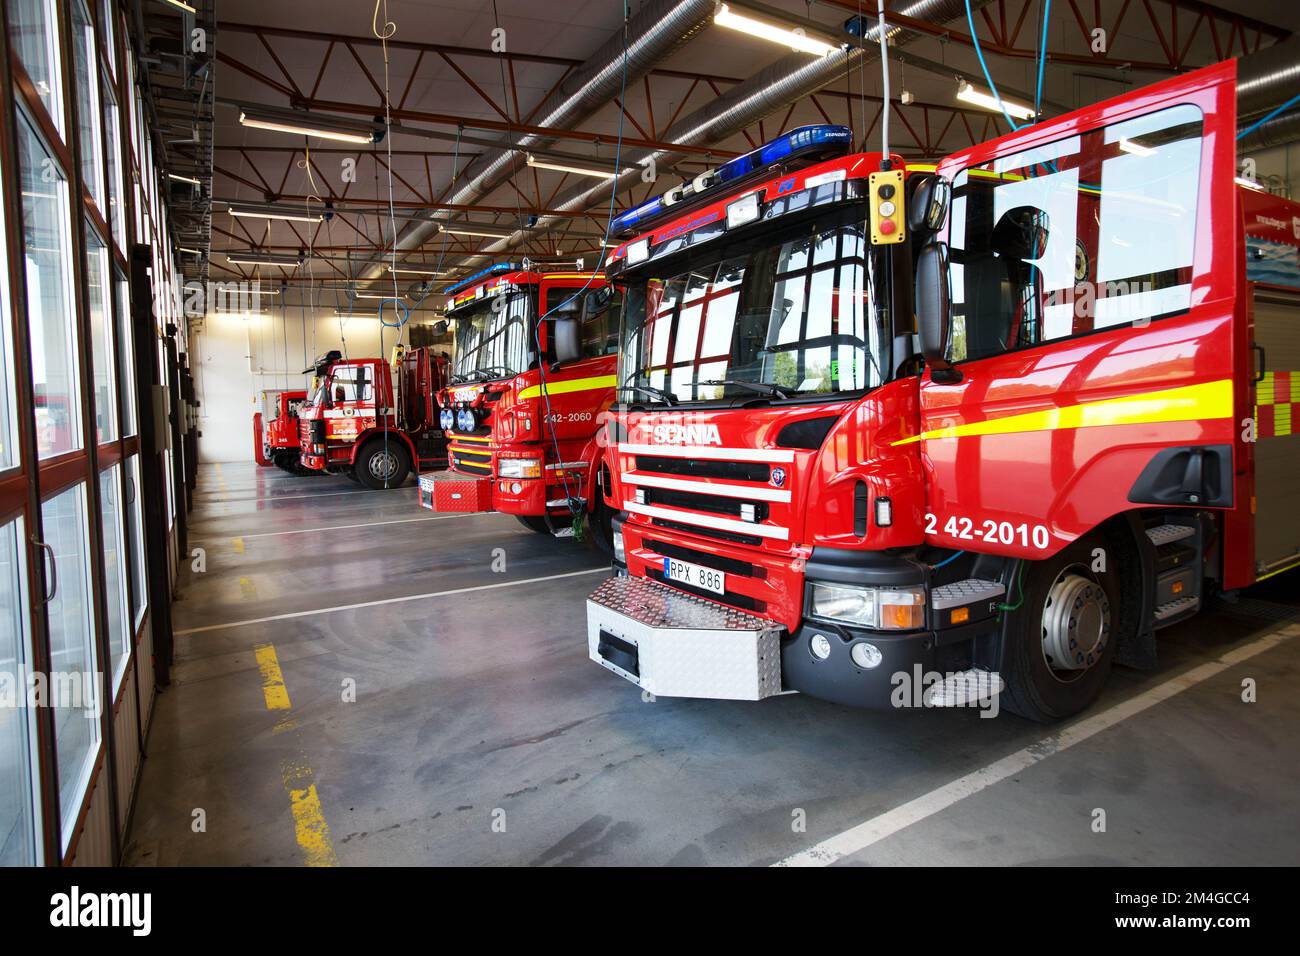 Rescue trucks at a fire station. Stock Photo